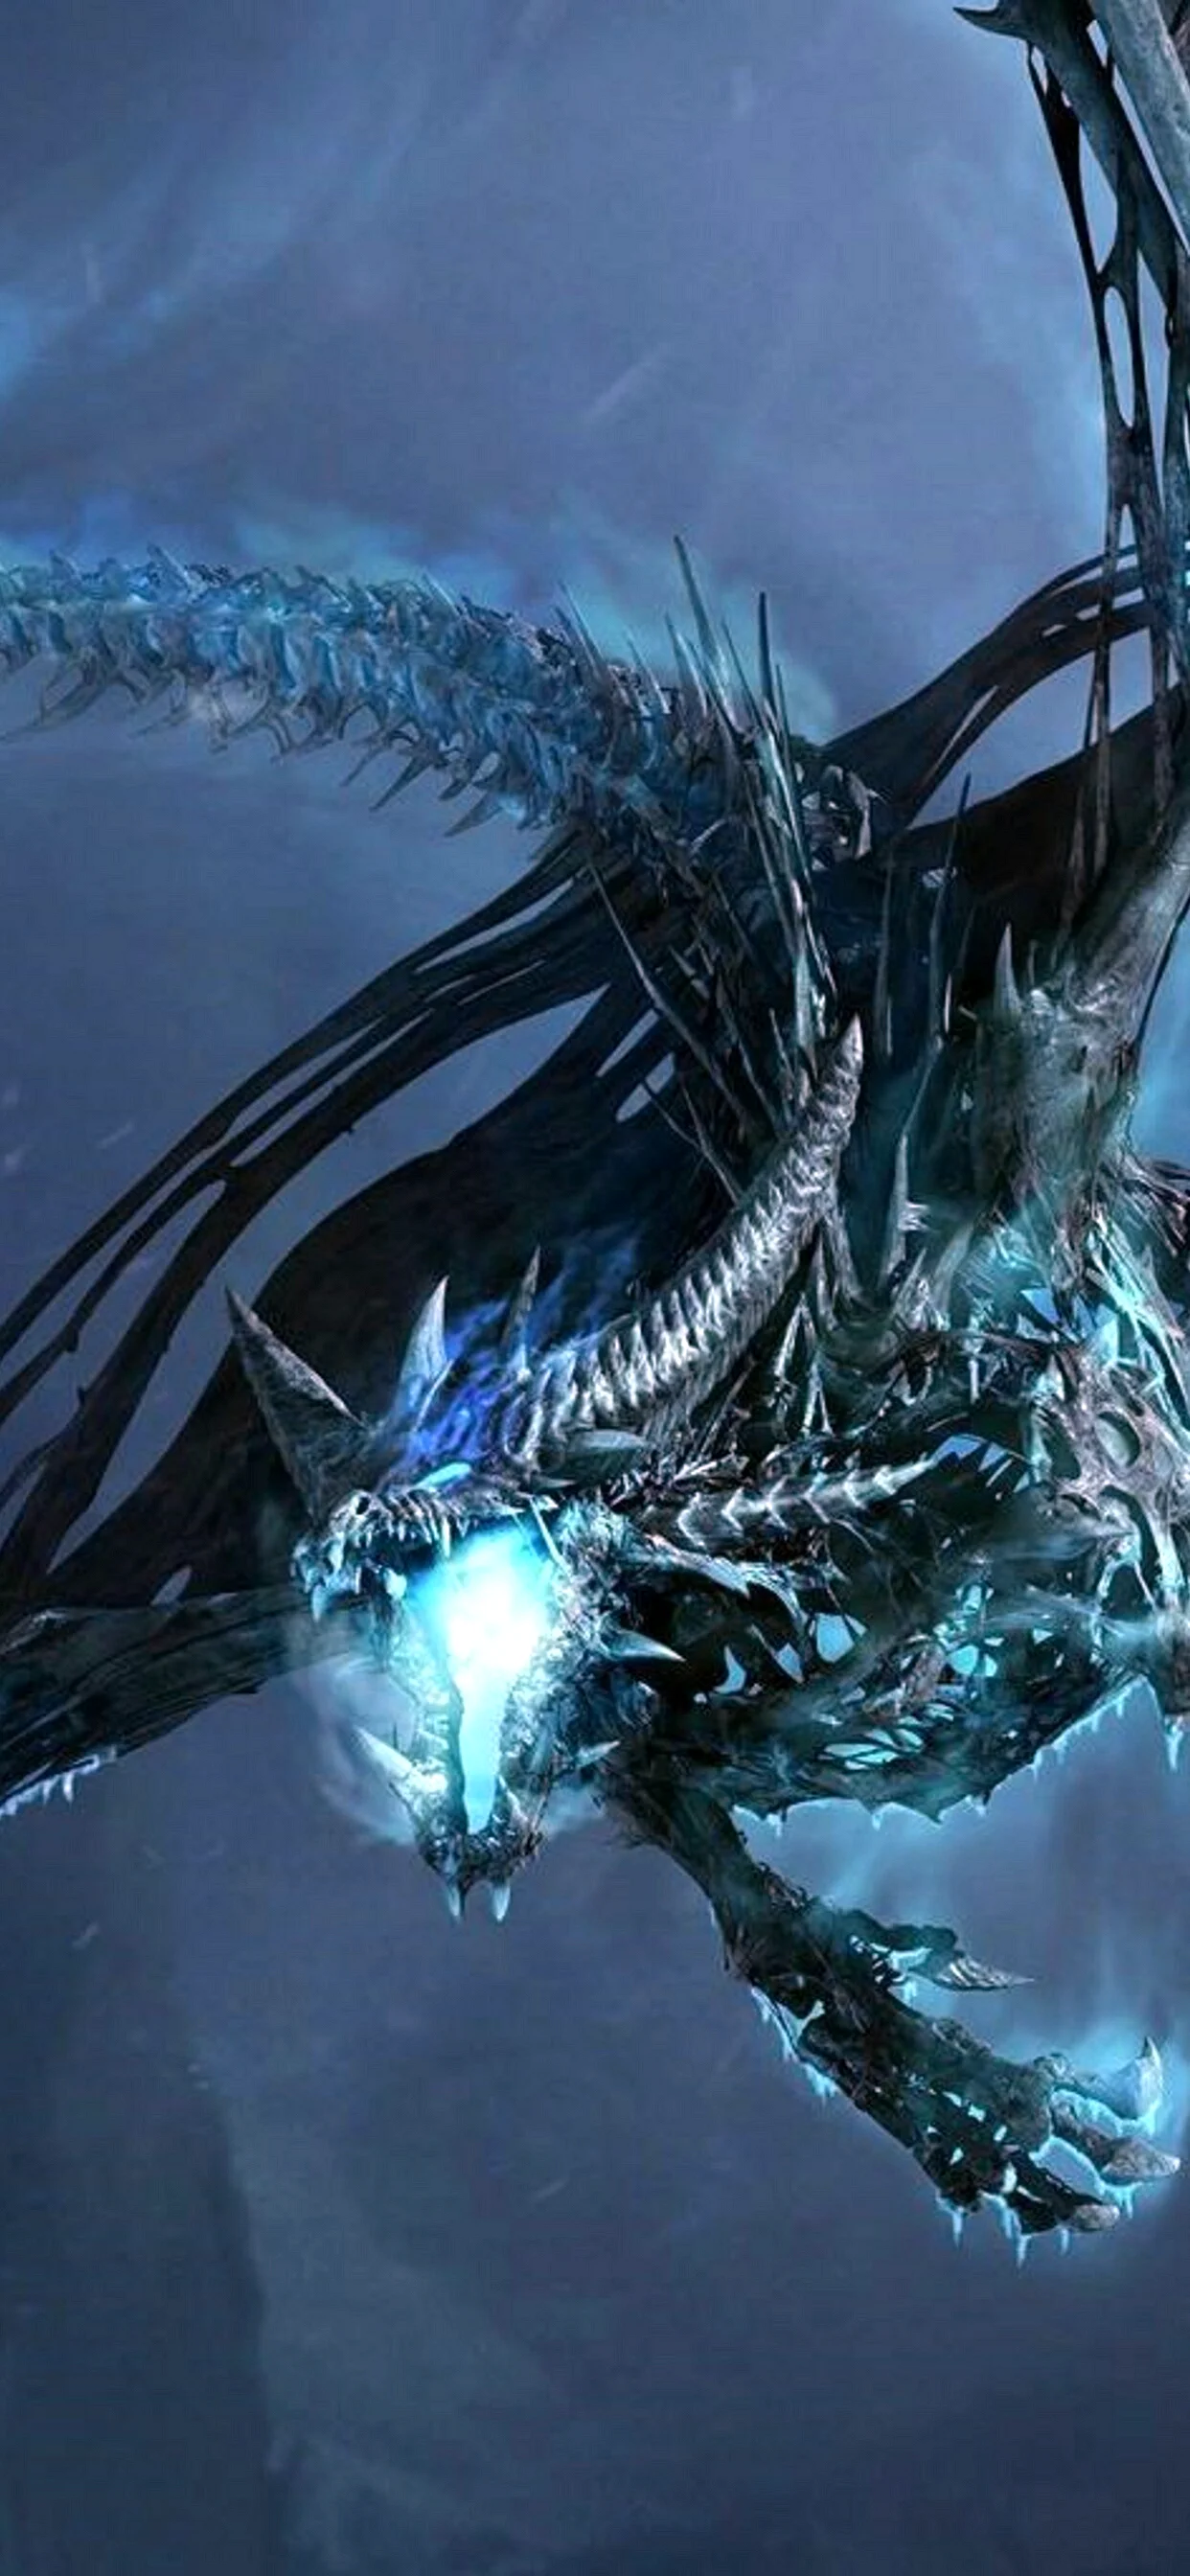 Lich King Dragon Wallpaper for iPhone 11 Pro Max